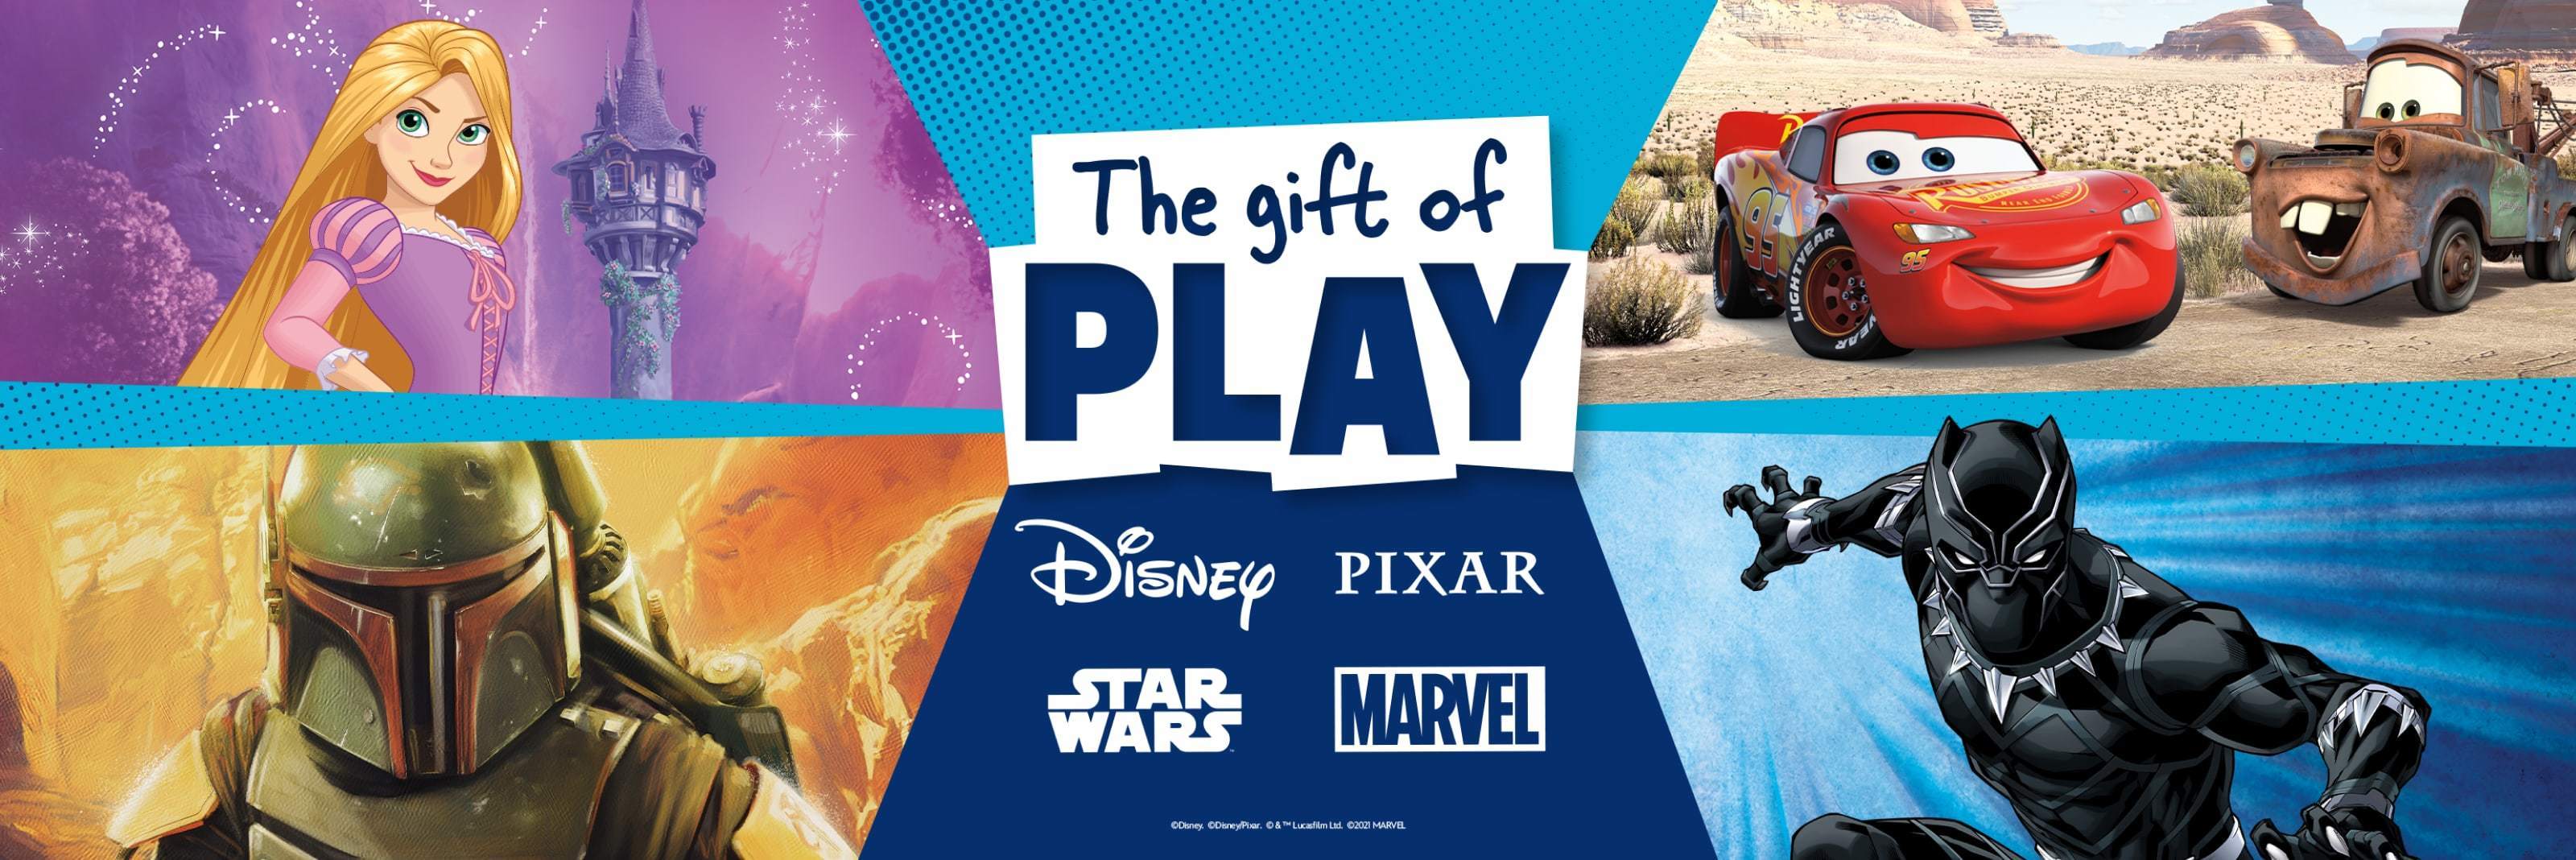 Disney, Pixar, Star Wars and Marvel characters in front of a blue background with brand logos in the centre